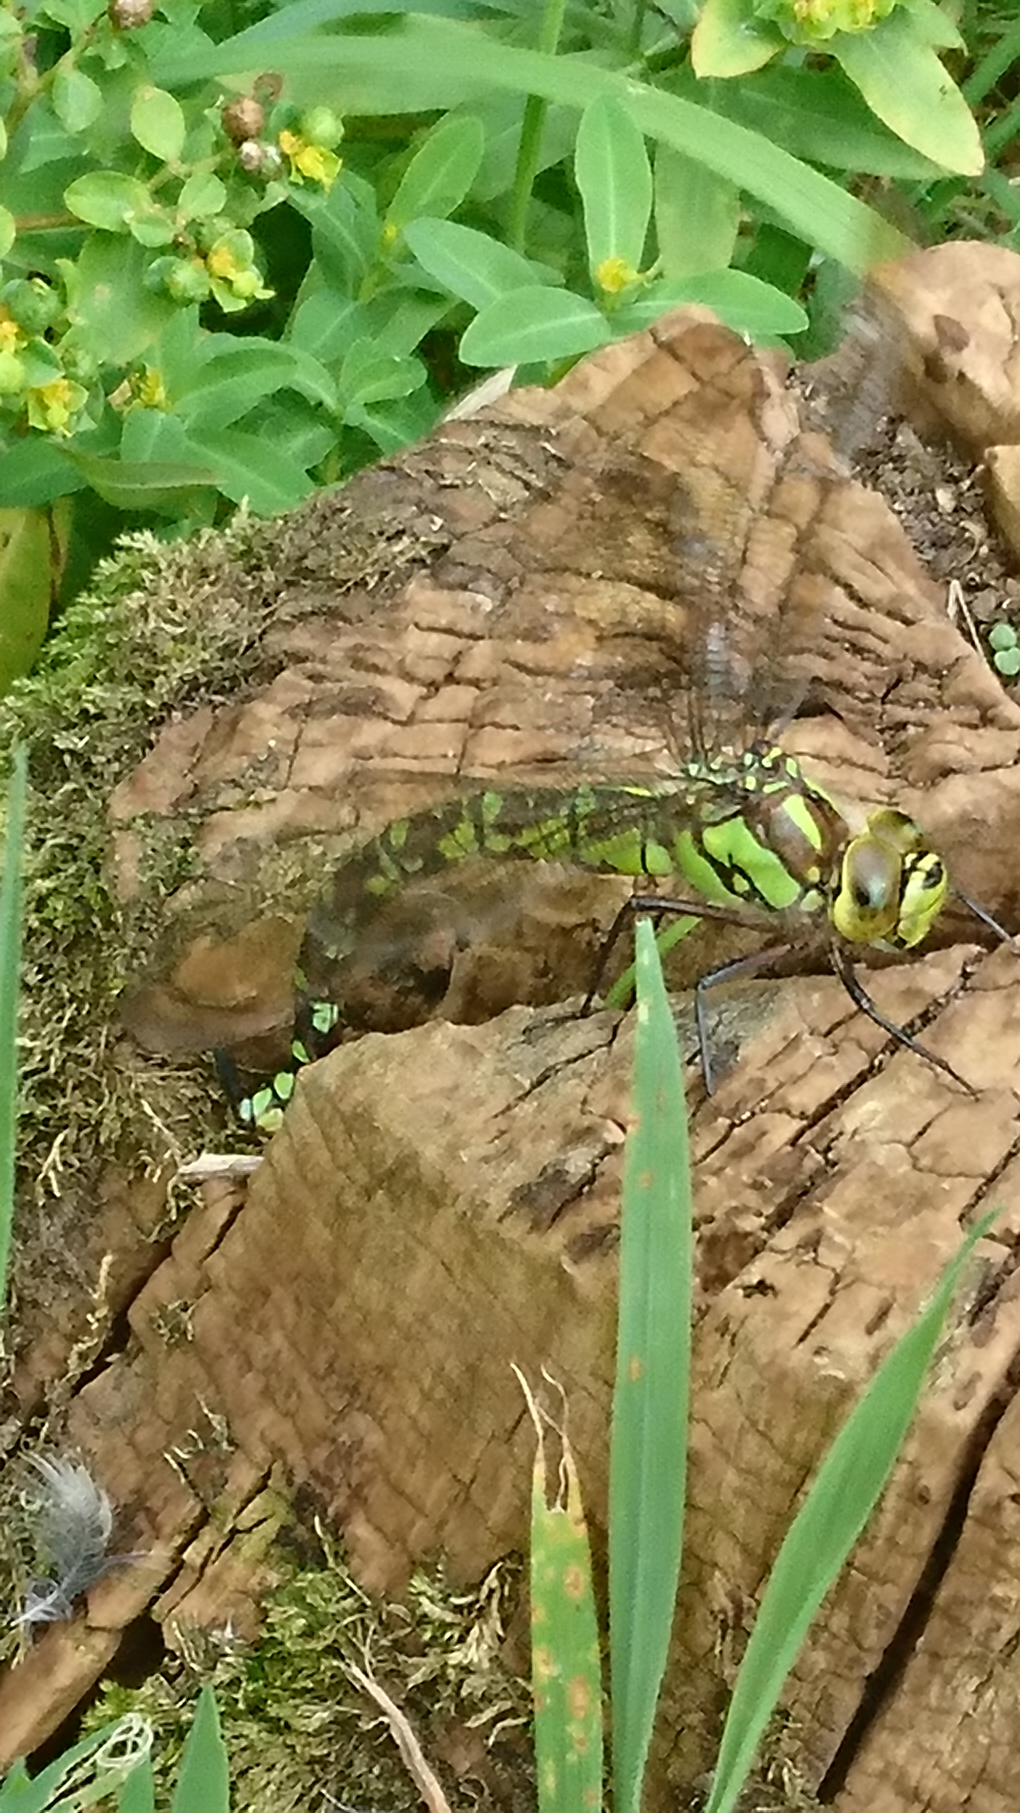 I chased a Southern Hawker Dragonfly round our pond trying to get a photo but she was very fast, then suddenly she alighted on a tree stump and started laying eggs in a crack so i got the shot. She had beautiful markings of black and bright green. She made my day!